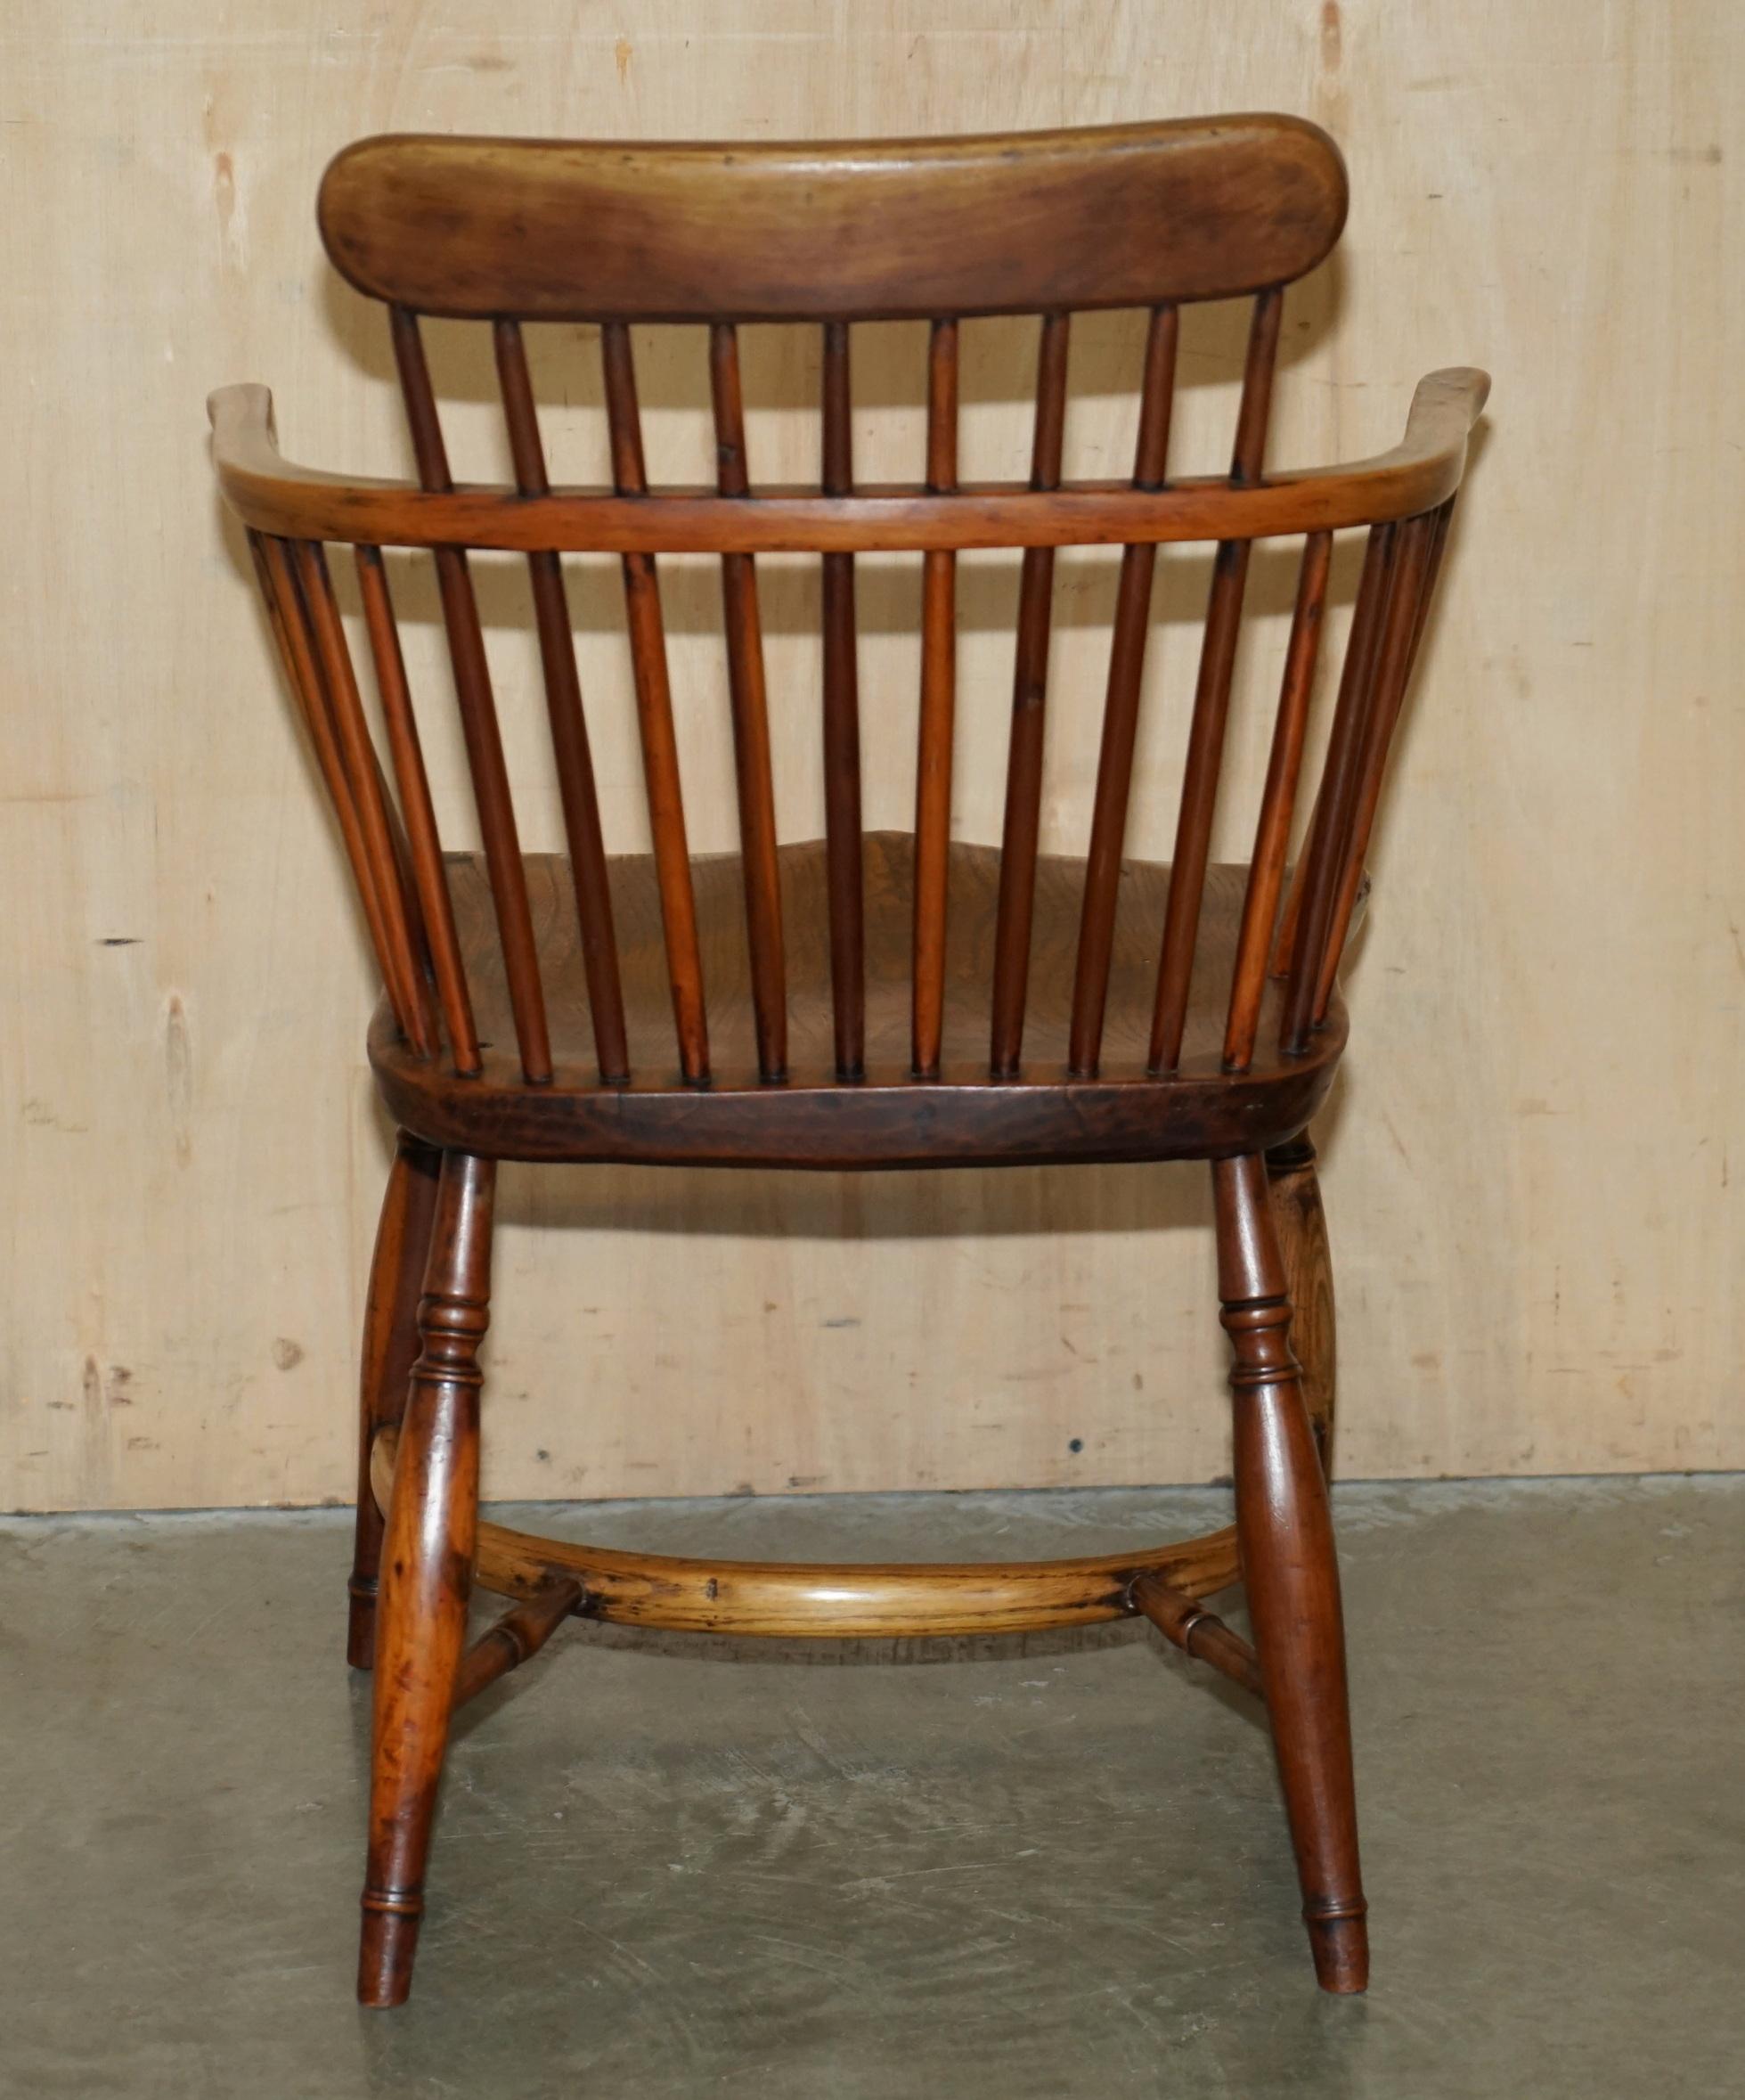 FINE ANTiQUE EARLY 19TH CENTURY BURR YEW WOOD & ELM COMB BACK WINDSOR ARMCHAIR For Sale 7